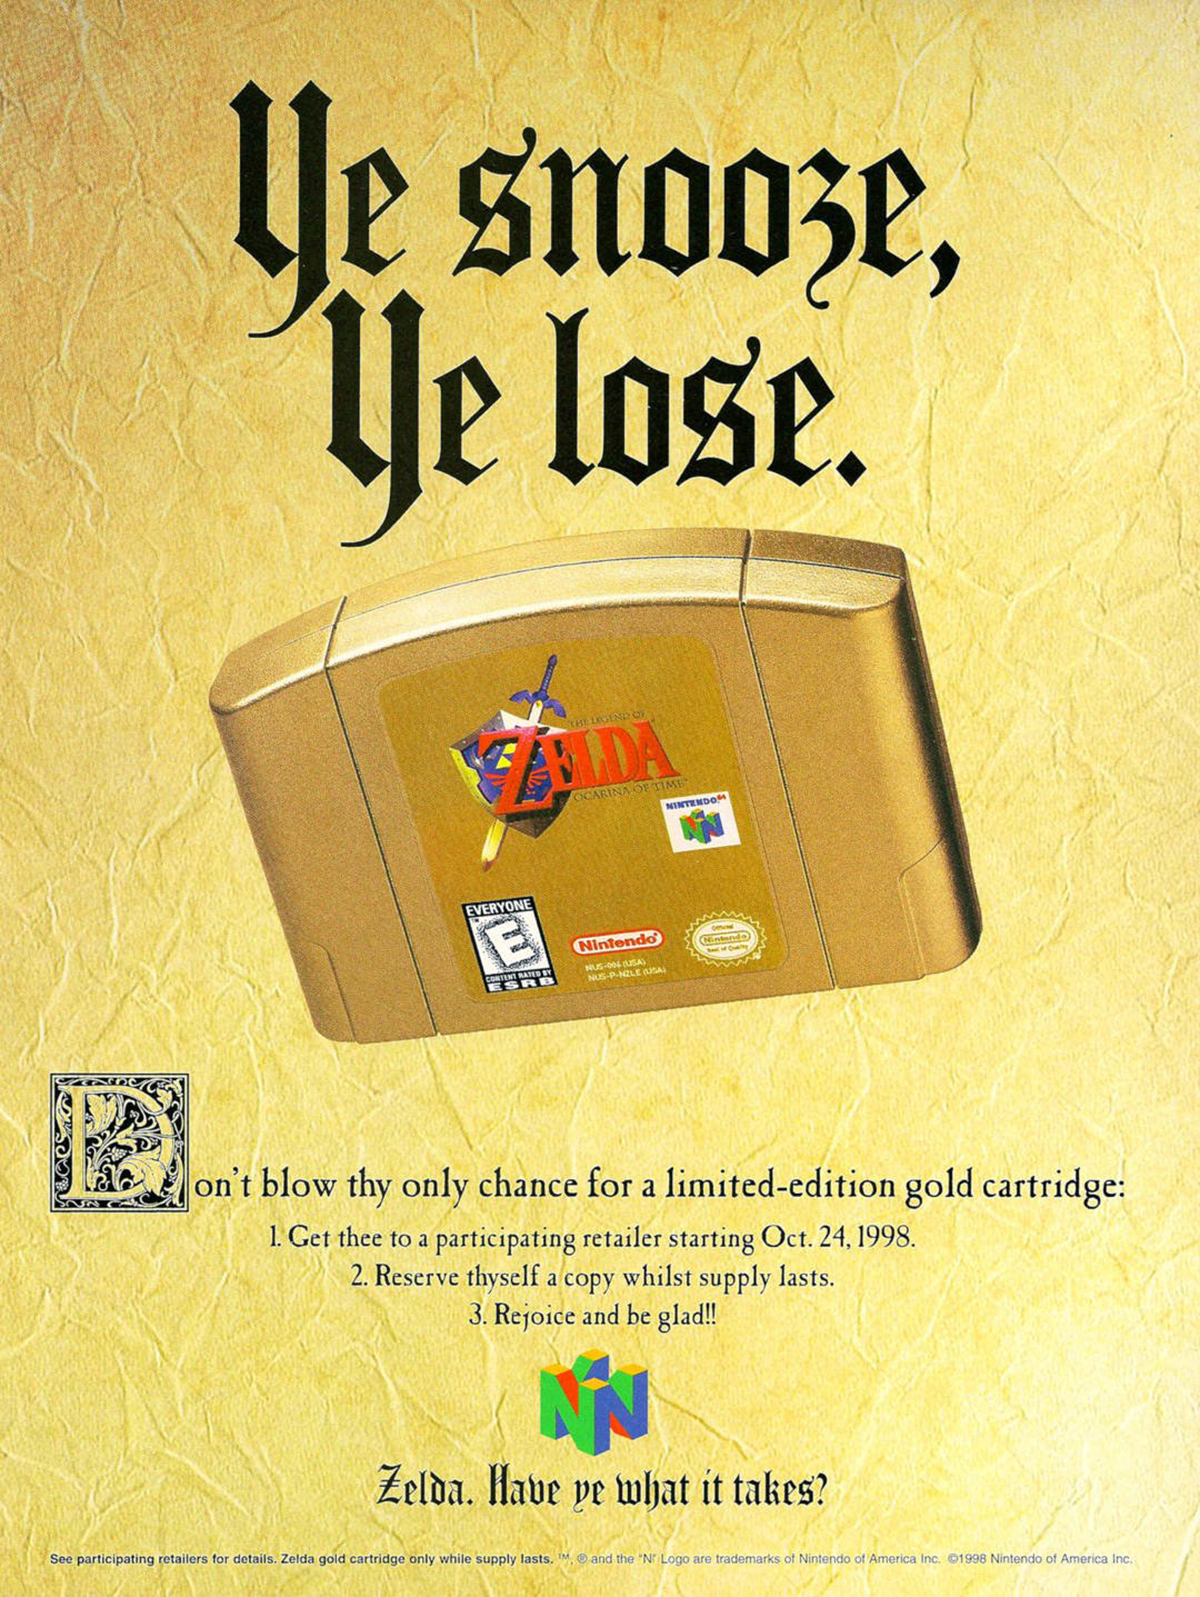 old nintendo power ads - Co Ye snooze, Ye lose. Fallda Bakrie E 6383 C on't blow thy only chance for a limitededition gold cartridge I Get thee to a participating retailer starting Oct. 24, 1998. 2. Reserve thoself a copy whilst supply lasts 3. Rejoice an